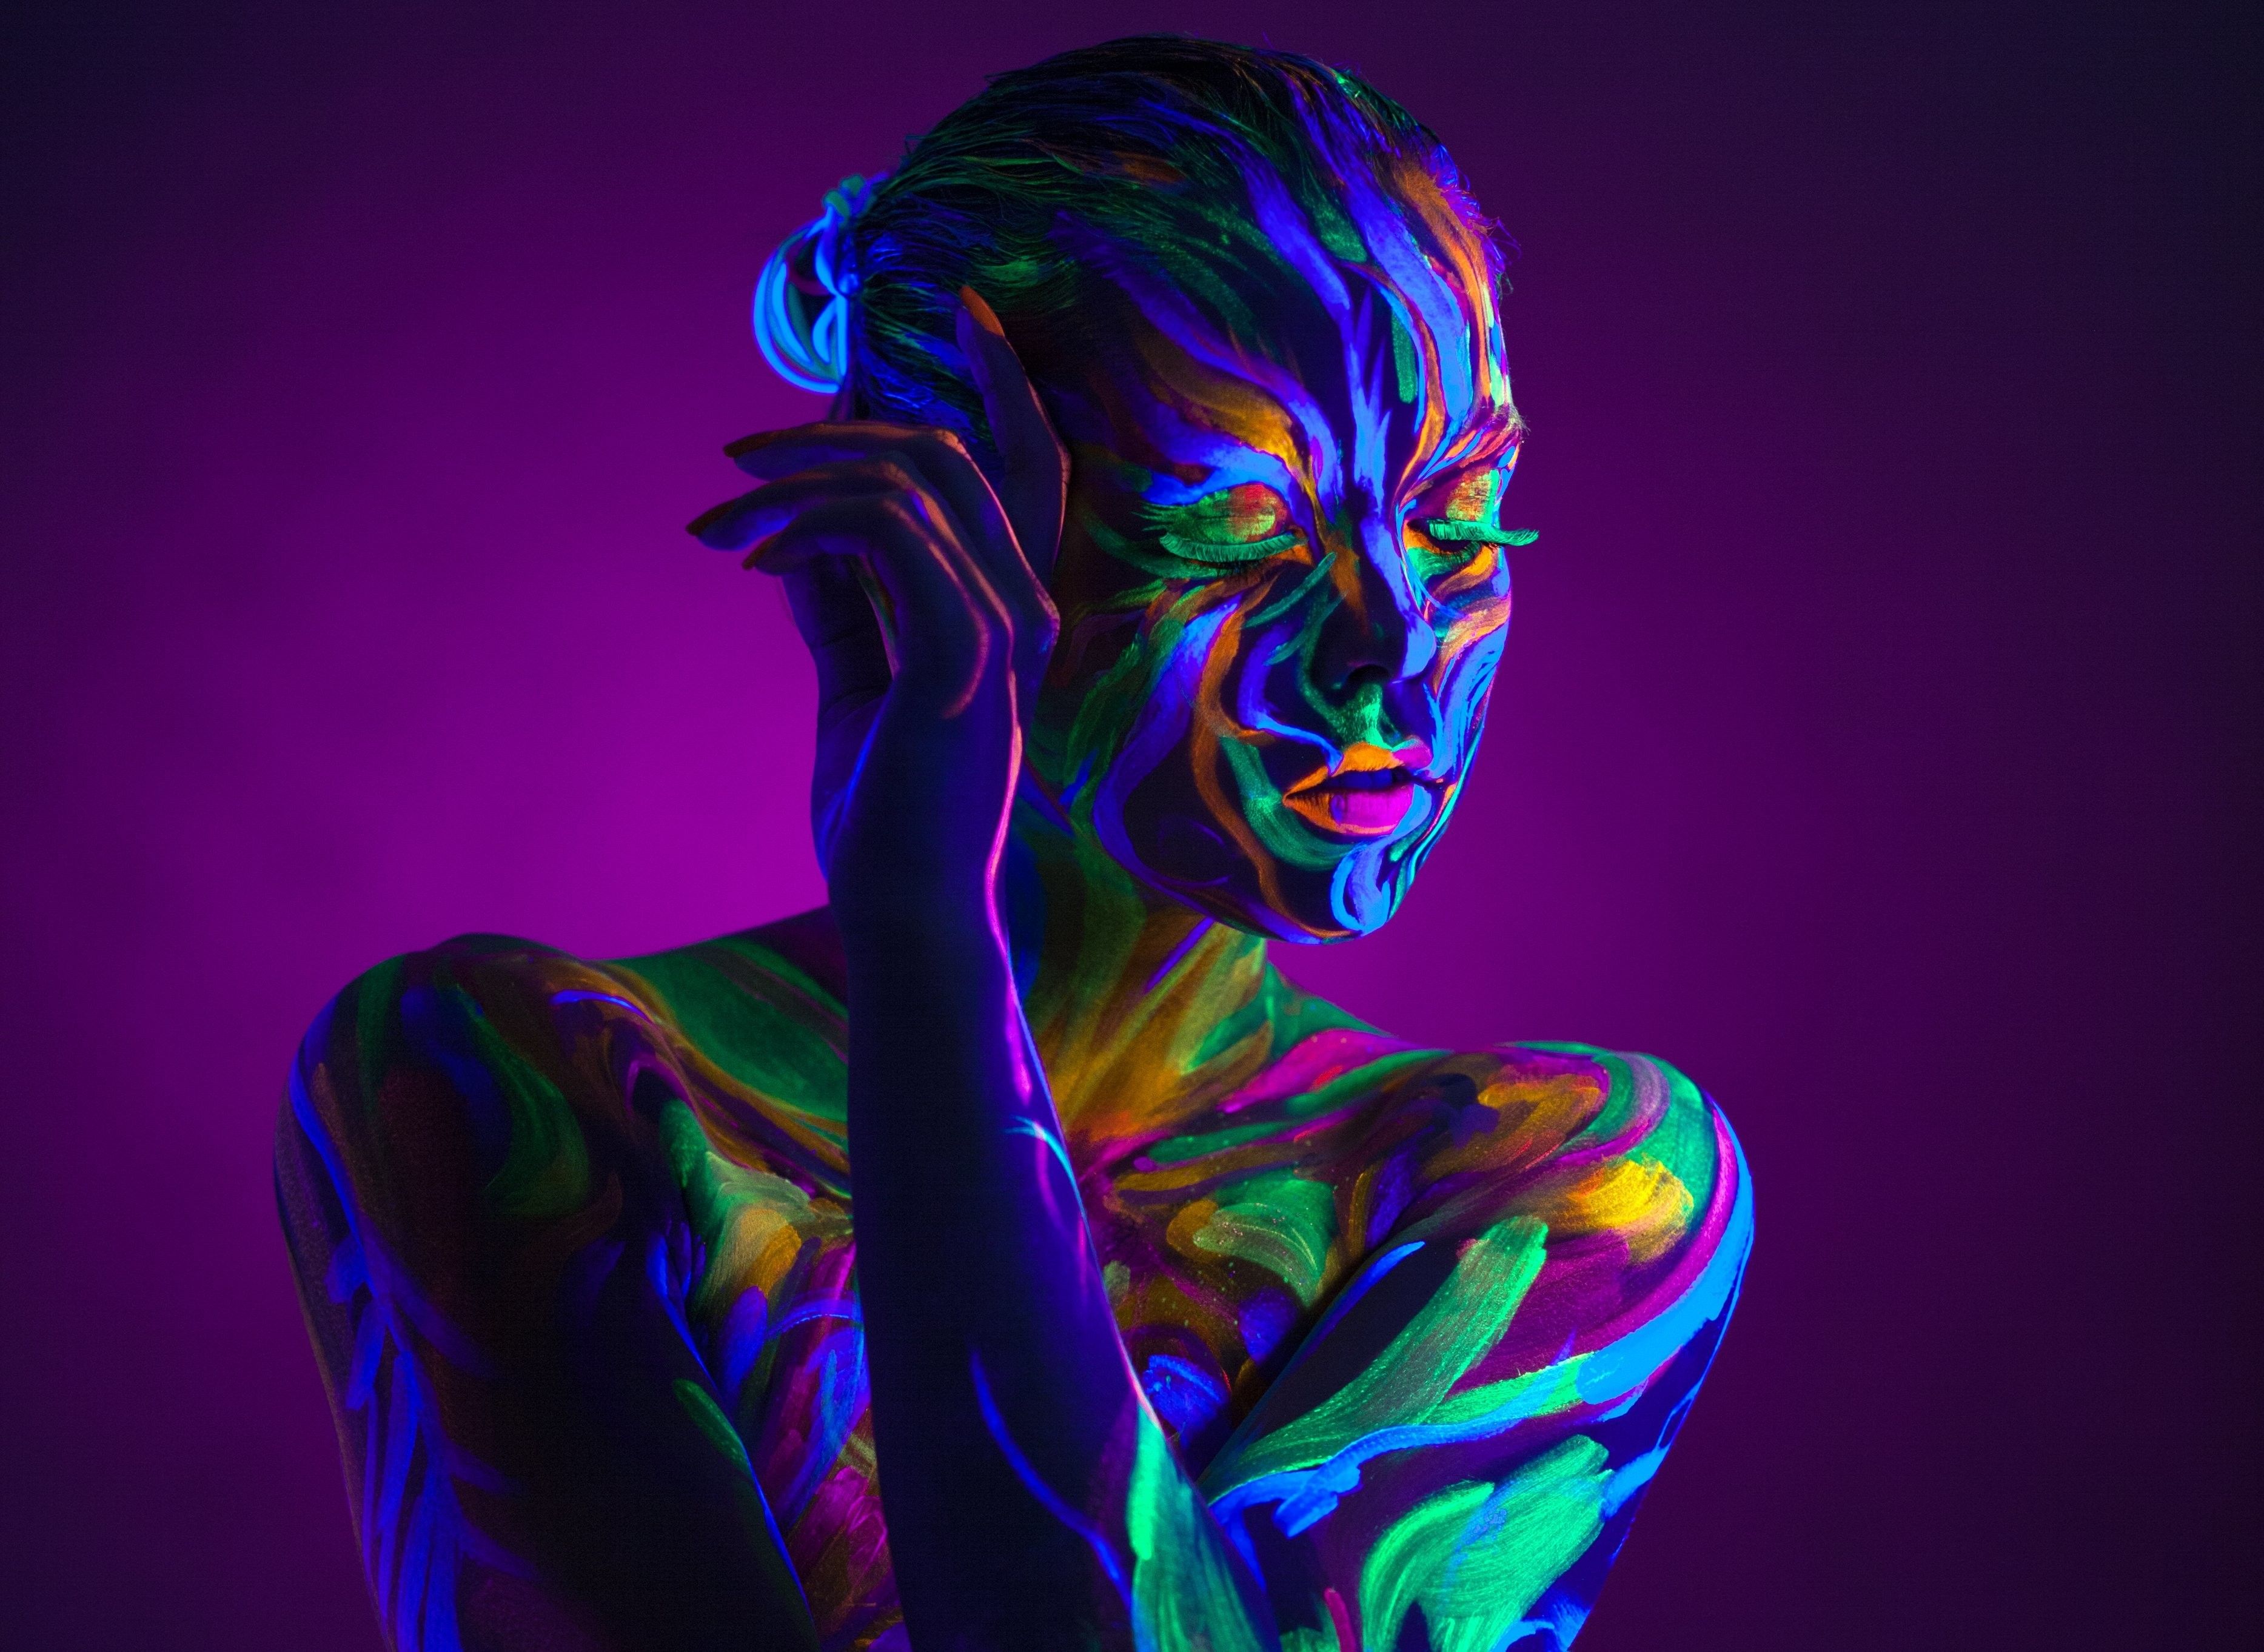 #face, #women, #body paint, #bare shoulders, #purple background, # neon, #colorful, #closed eyes, wallpaper